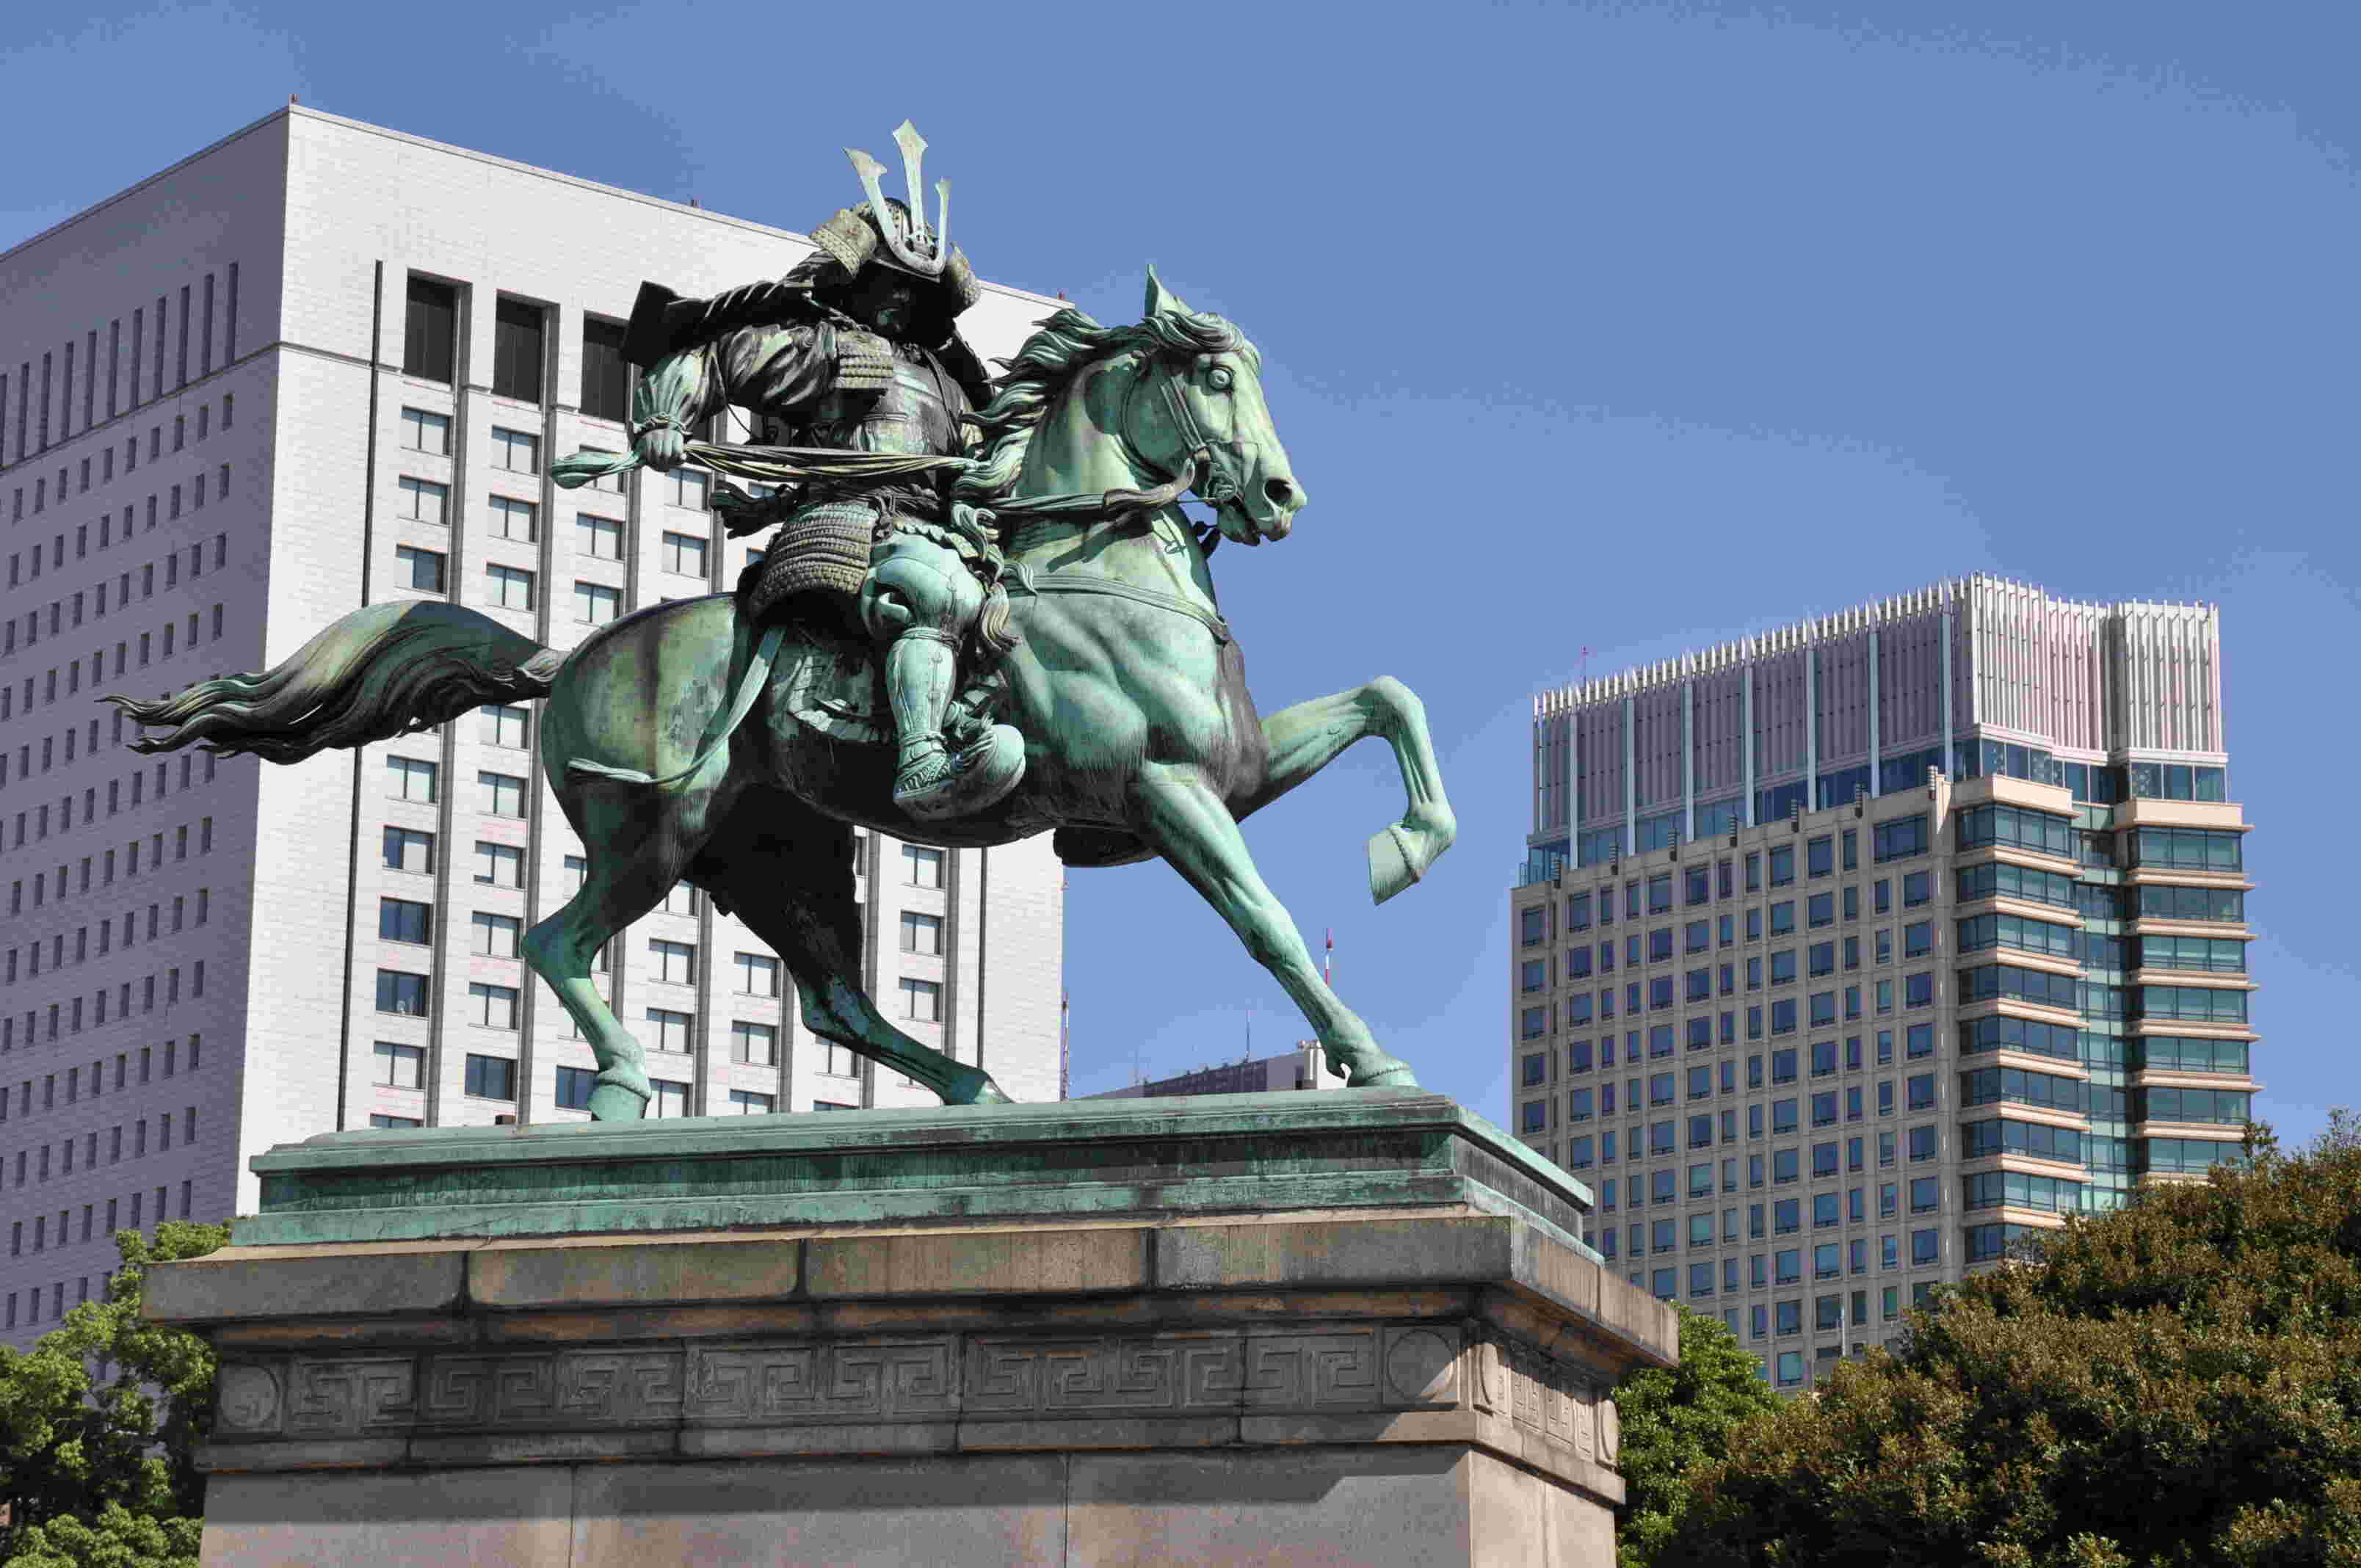 12-astounding-facts-about-the-emperor-of-the-muromachi-revolution-statue